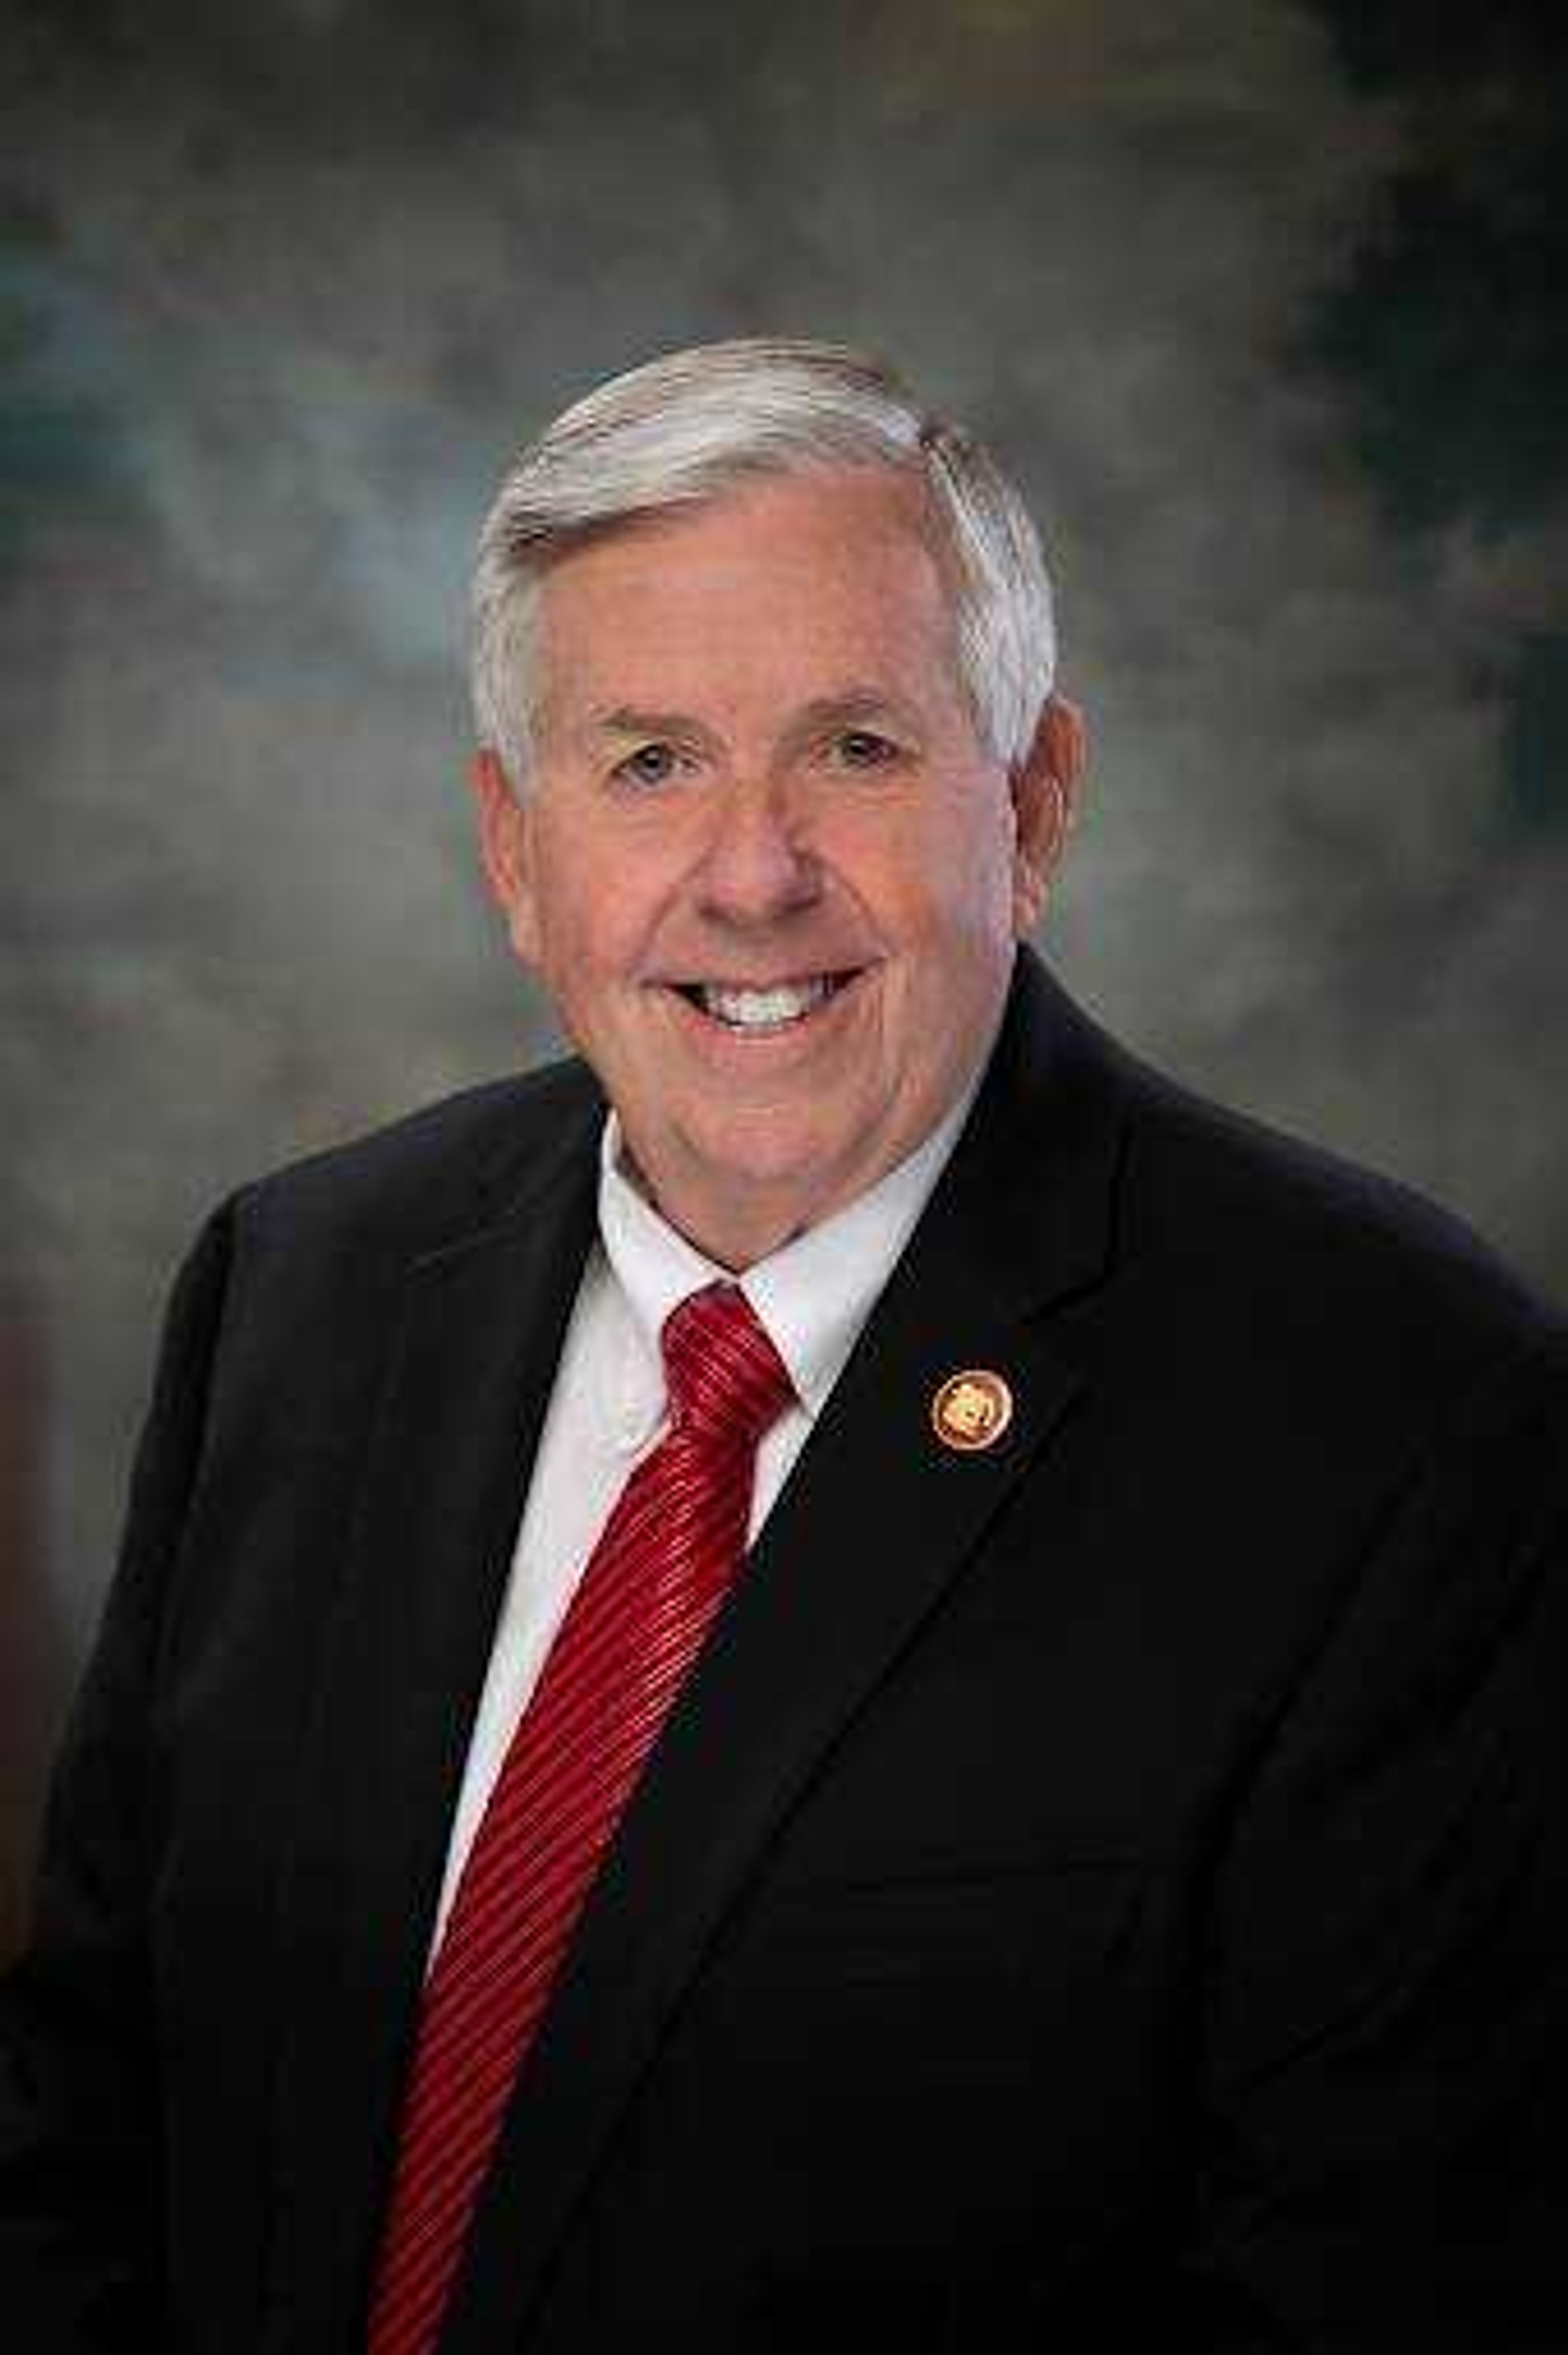 Gov. Mike Parson gave  his  State of the State address  on Wednesday , January 19, 2022. Parson spoke on a variety of topics such as investing in higher education, vaccination rates, infrastructure  projects and much more.